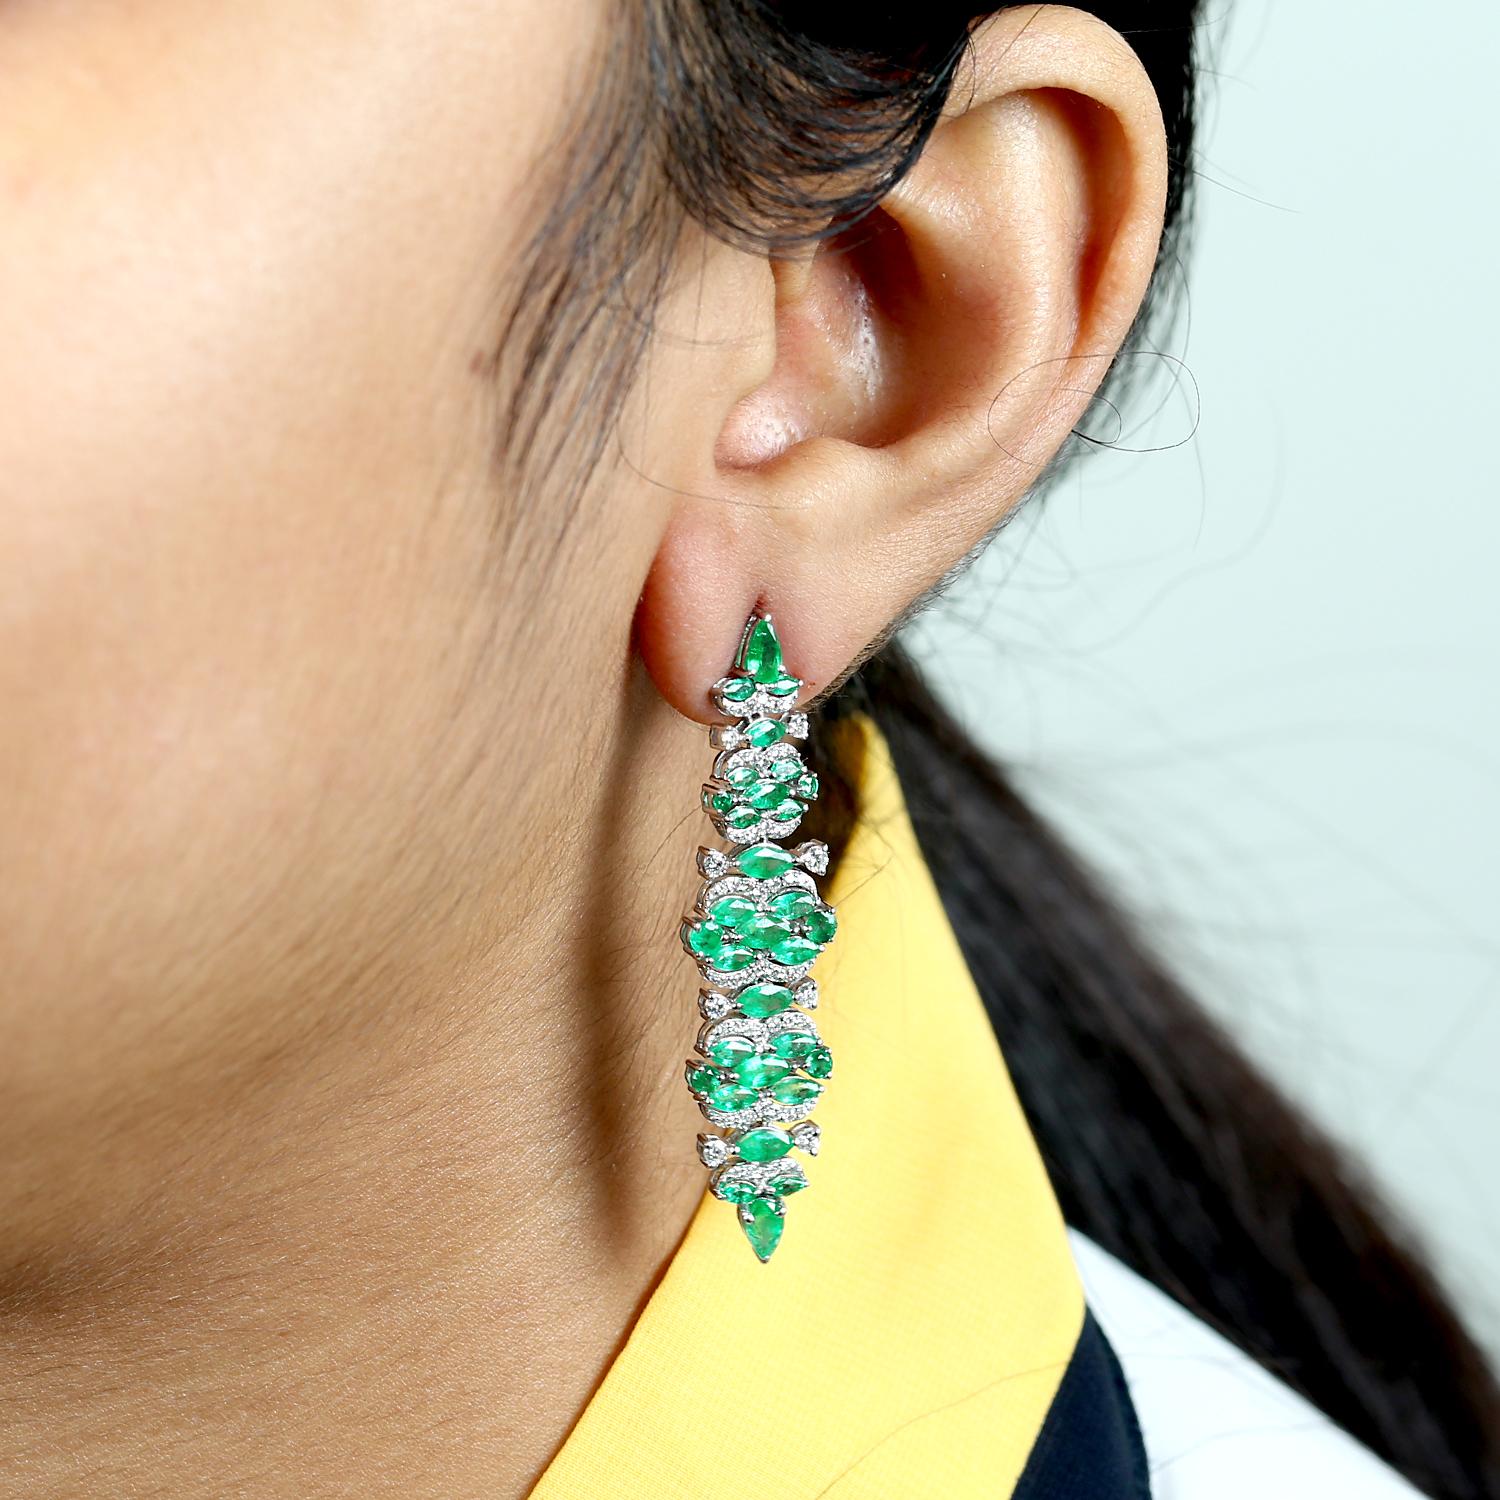 These emerald long dangle earrings are made from 14k white gold and feature diamonds. The emeralds are a rich, vibrant green color and are cut into a elongated shape that dangles elegantly from the ear. The diamonds add a touch of sparkle and shine